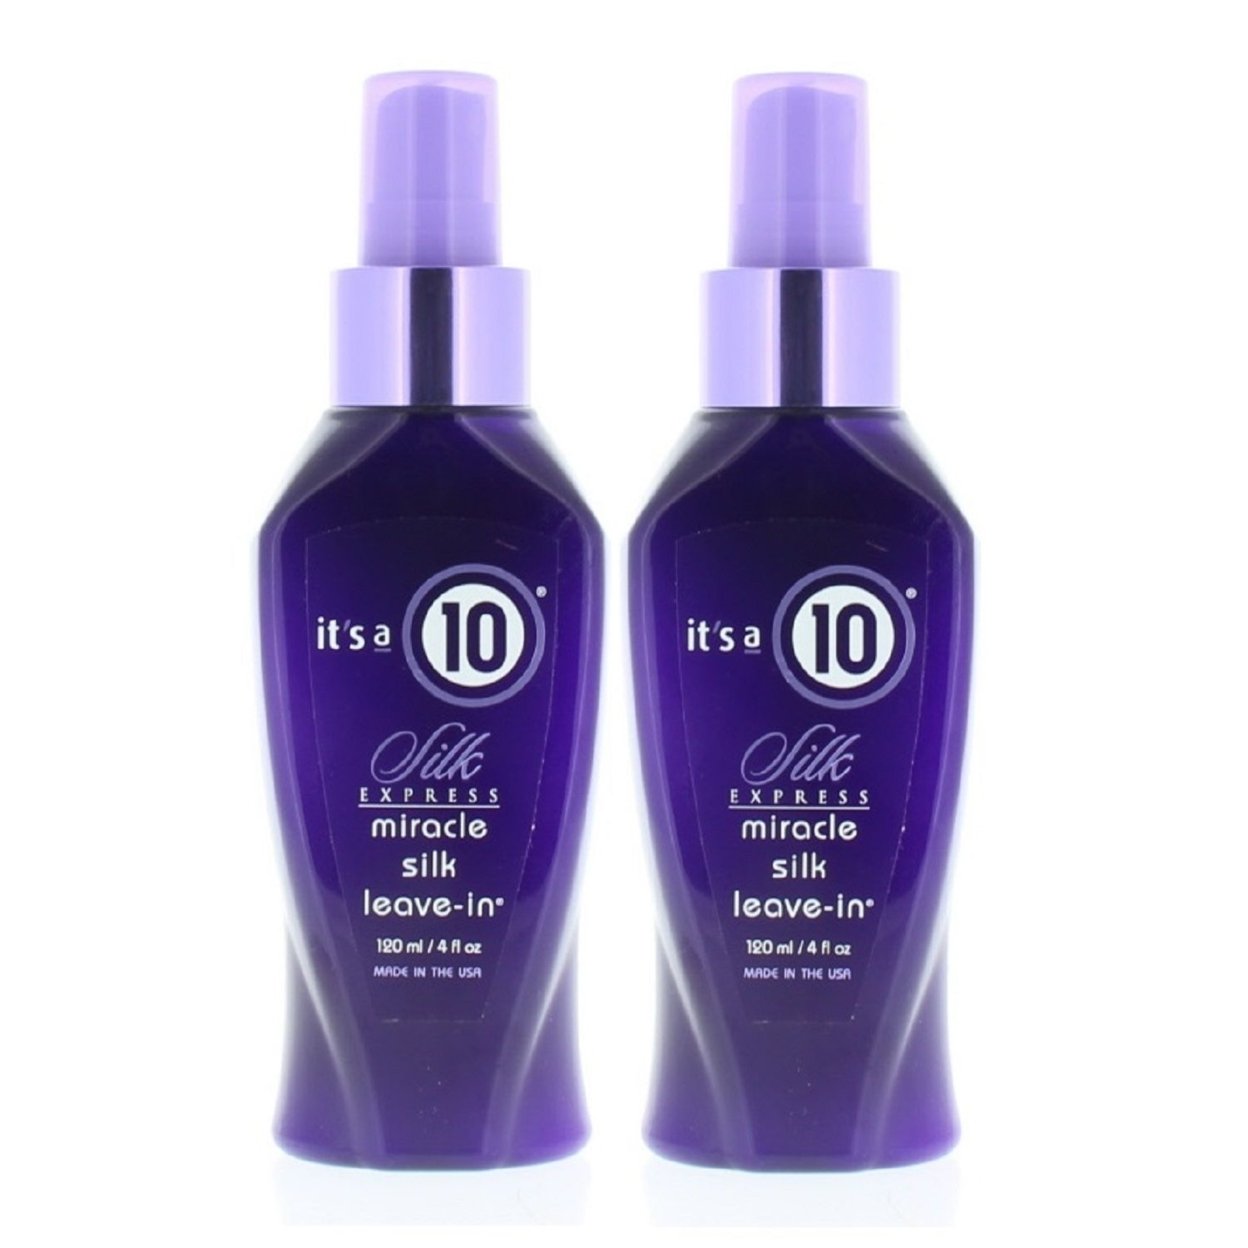 It's A 10 Silk Express Miracle Silk Leave In 4oz/120ml (2 Pack)